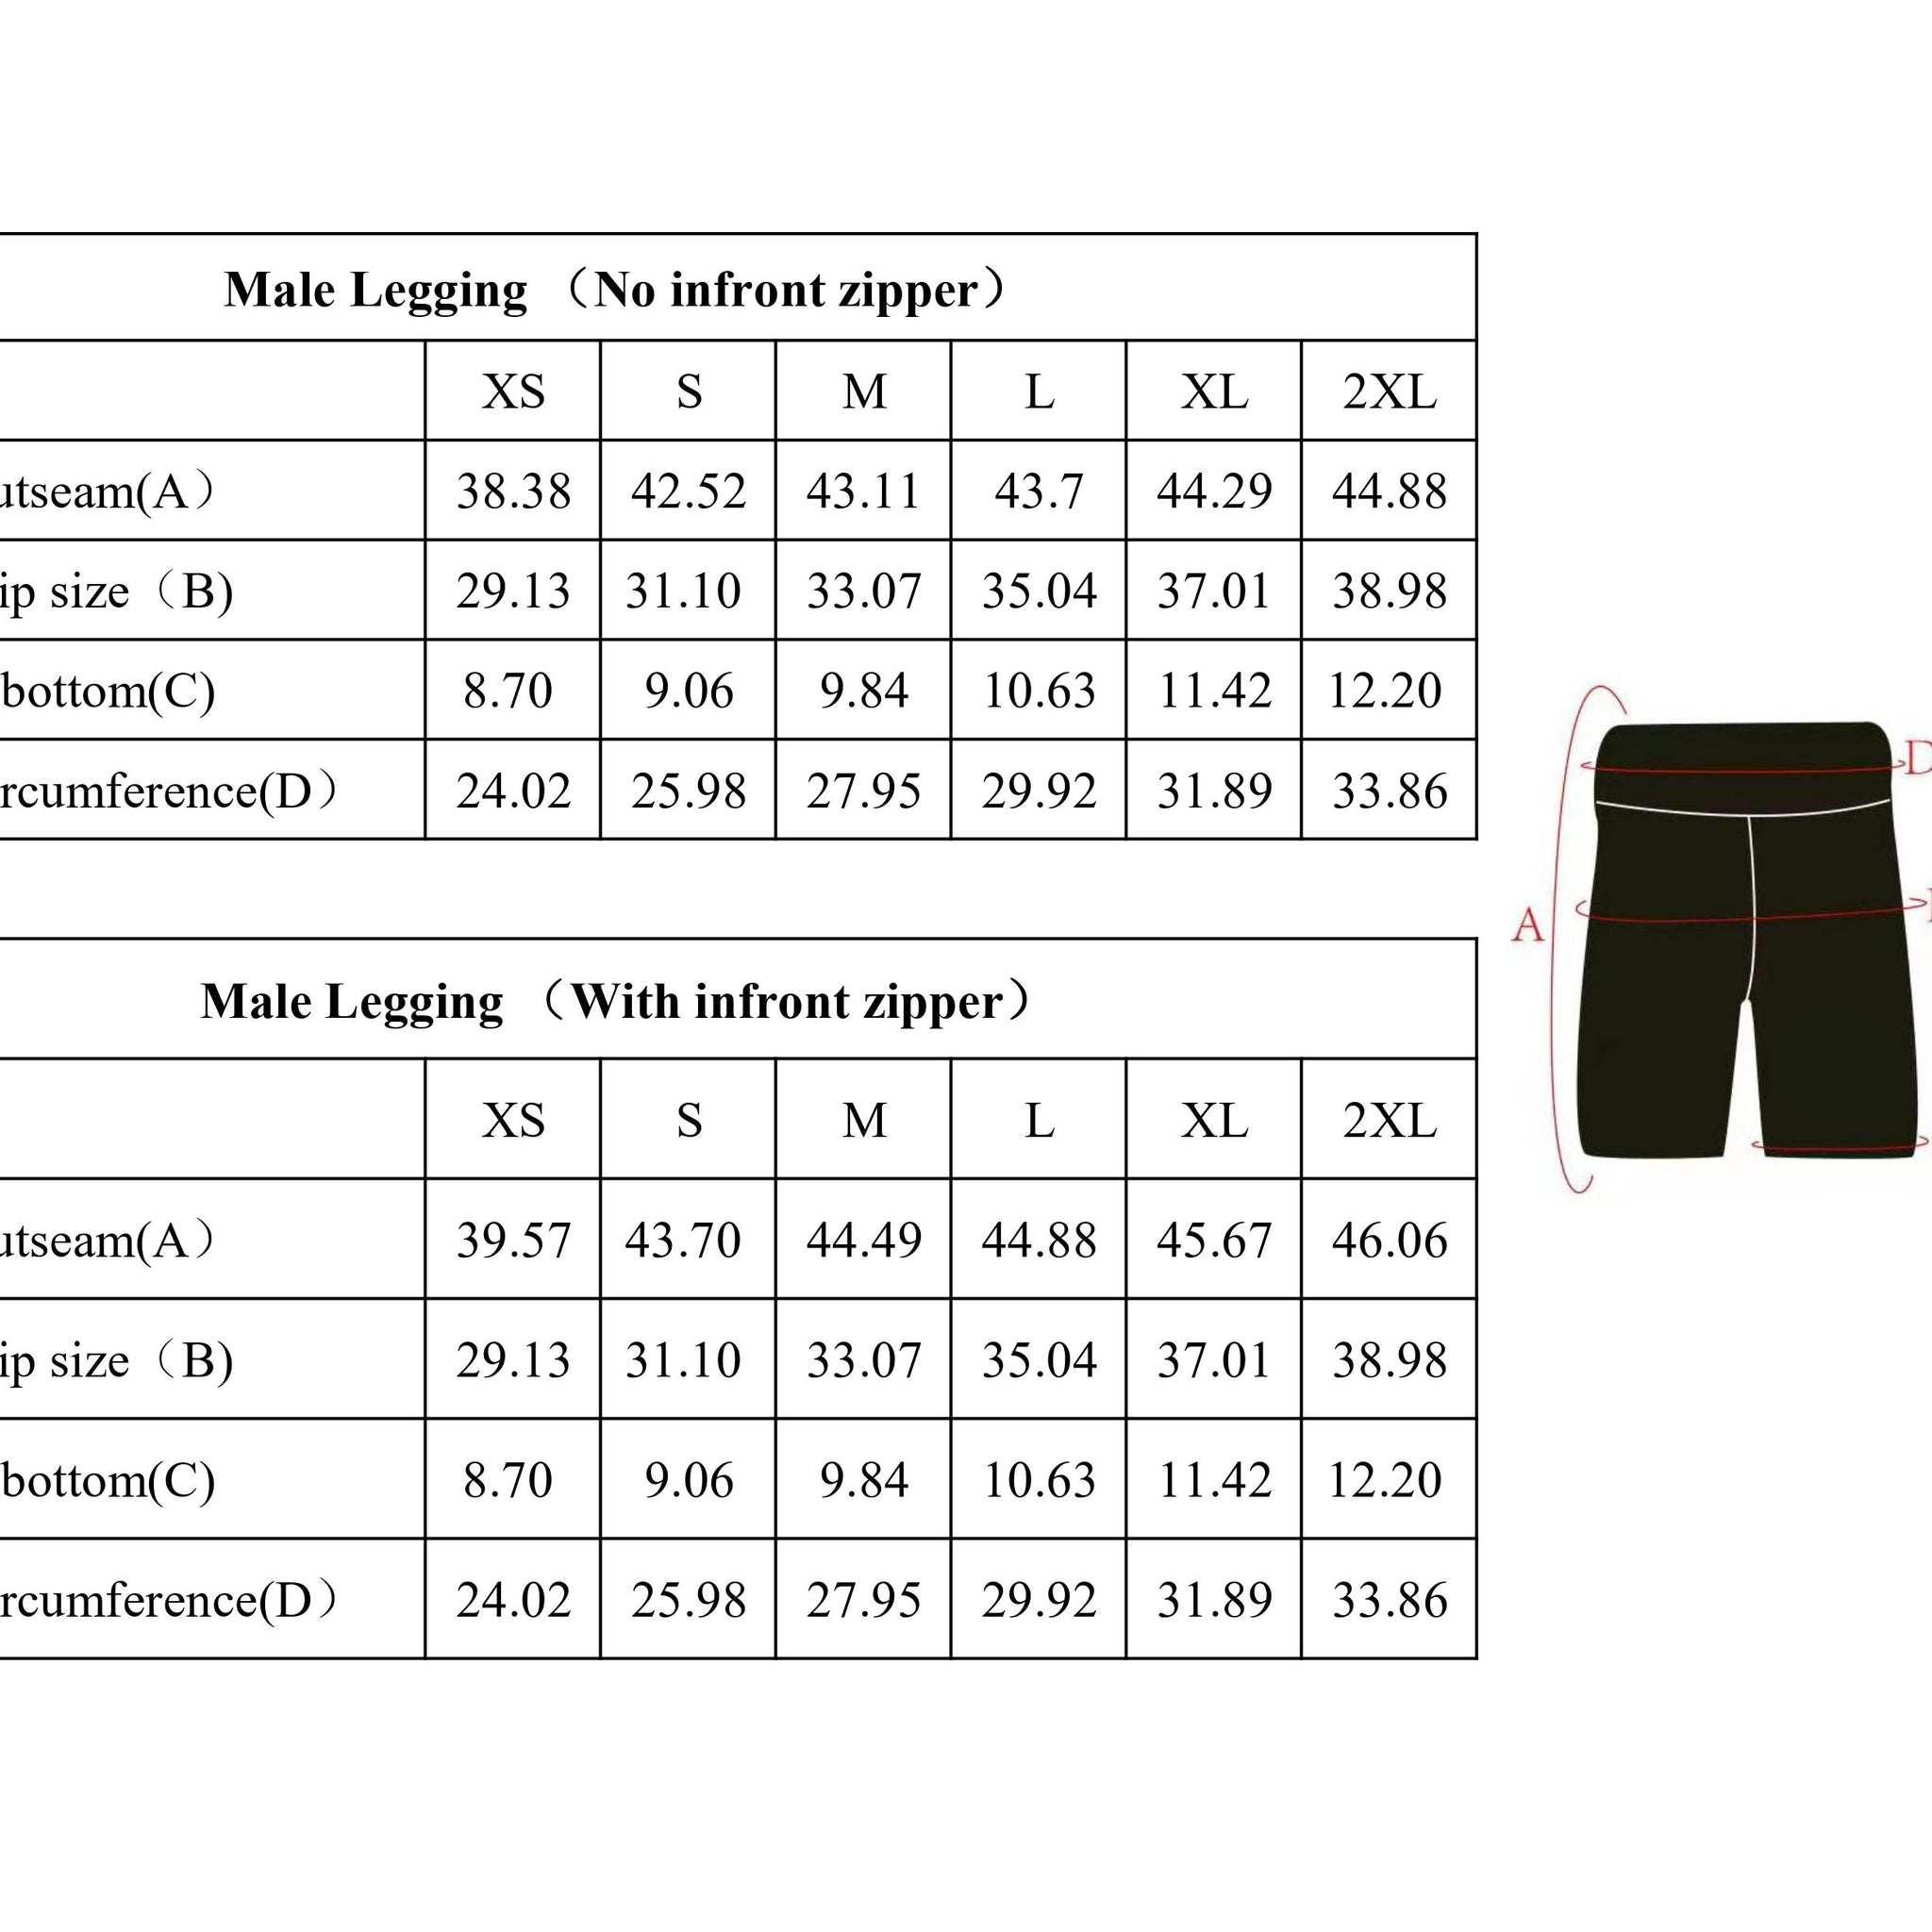 Men EMS shorts with removeable calve strap.